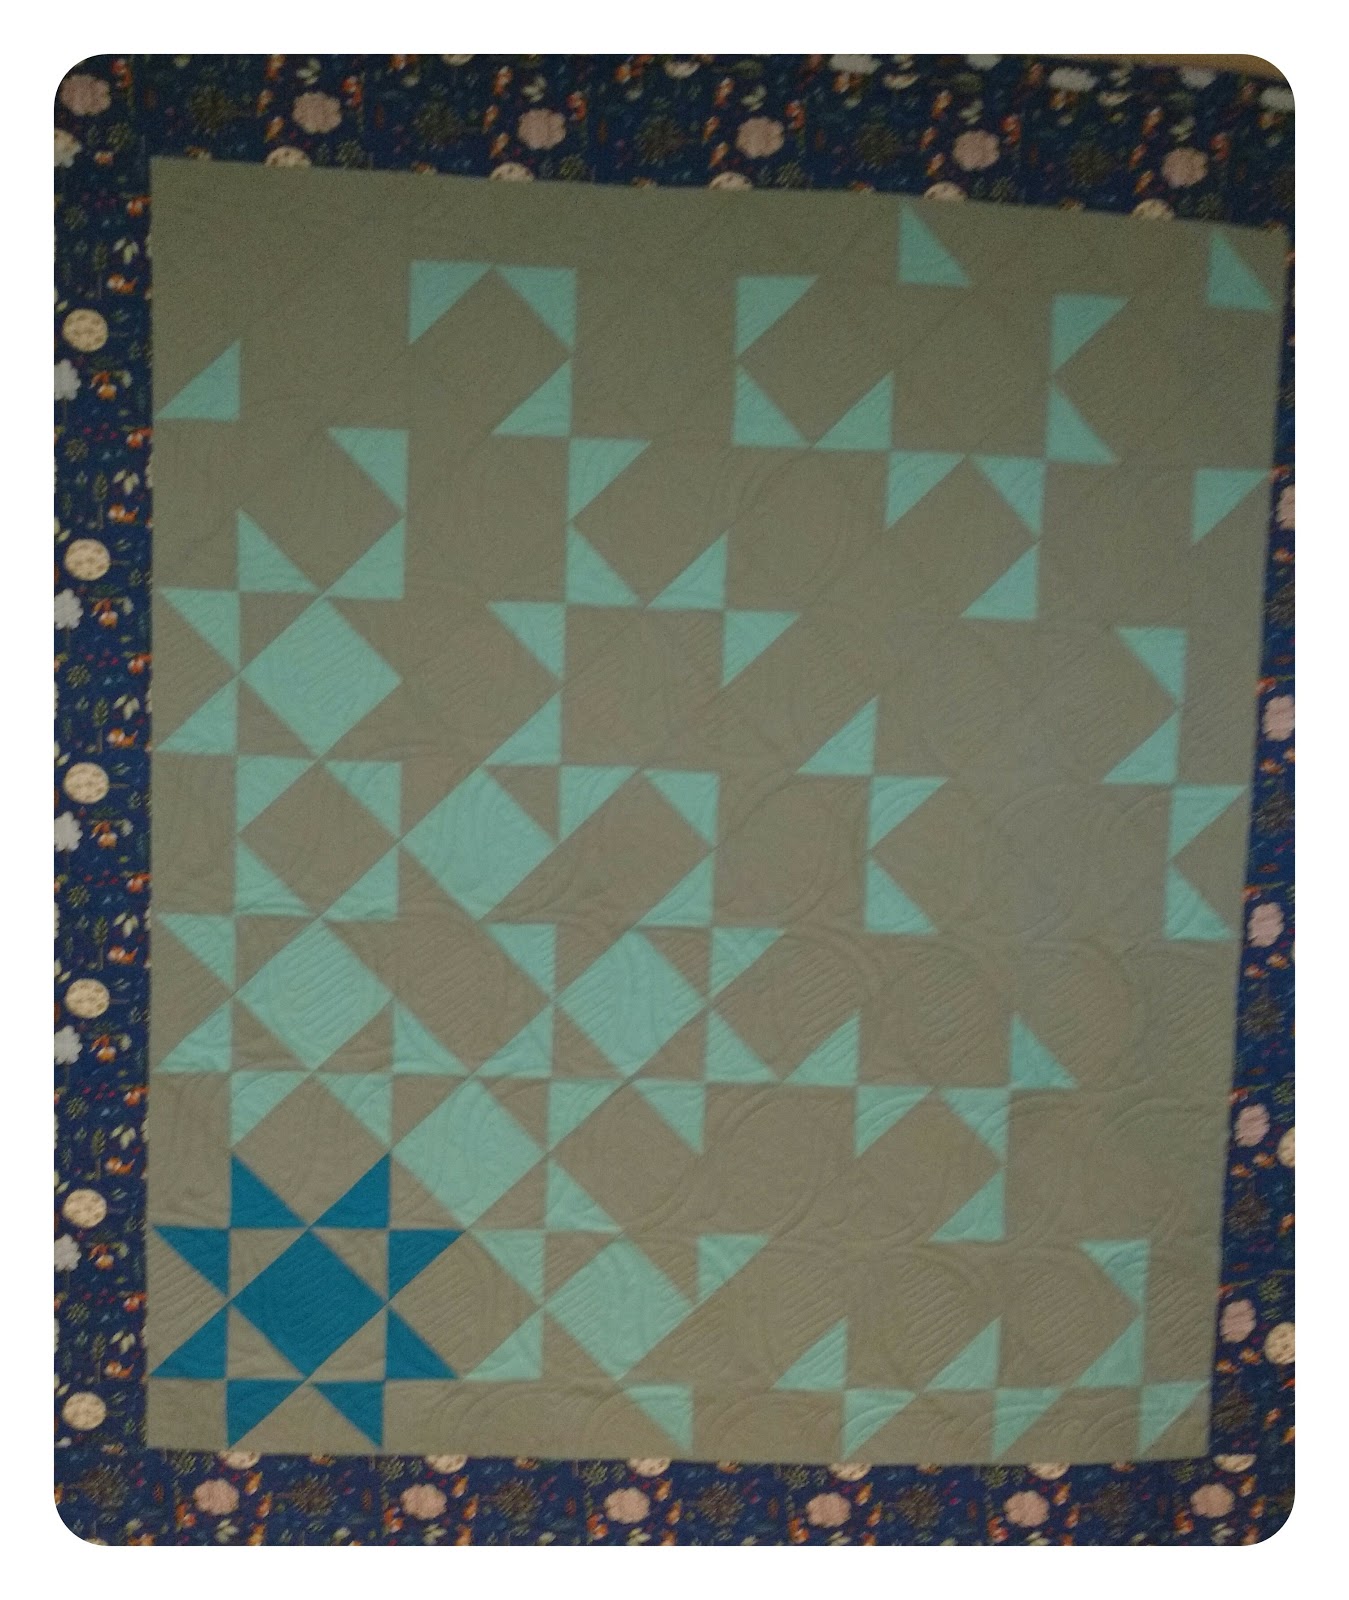 Quilting at the Cro's Nest: Loving my slow stitching!